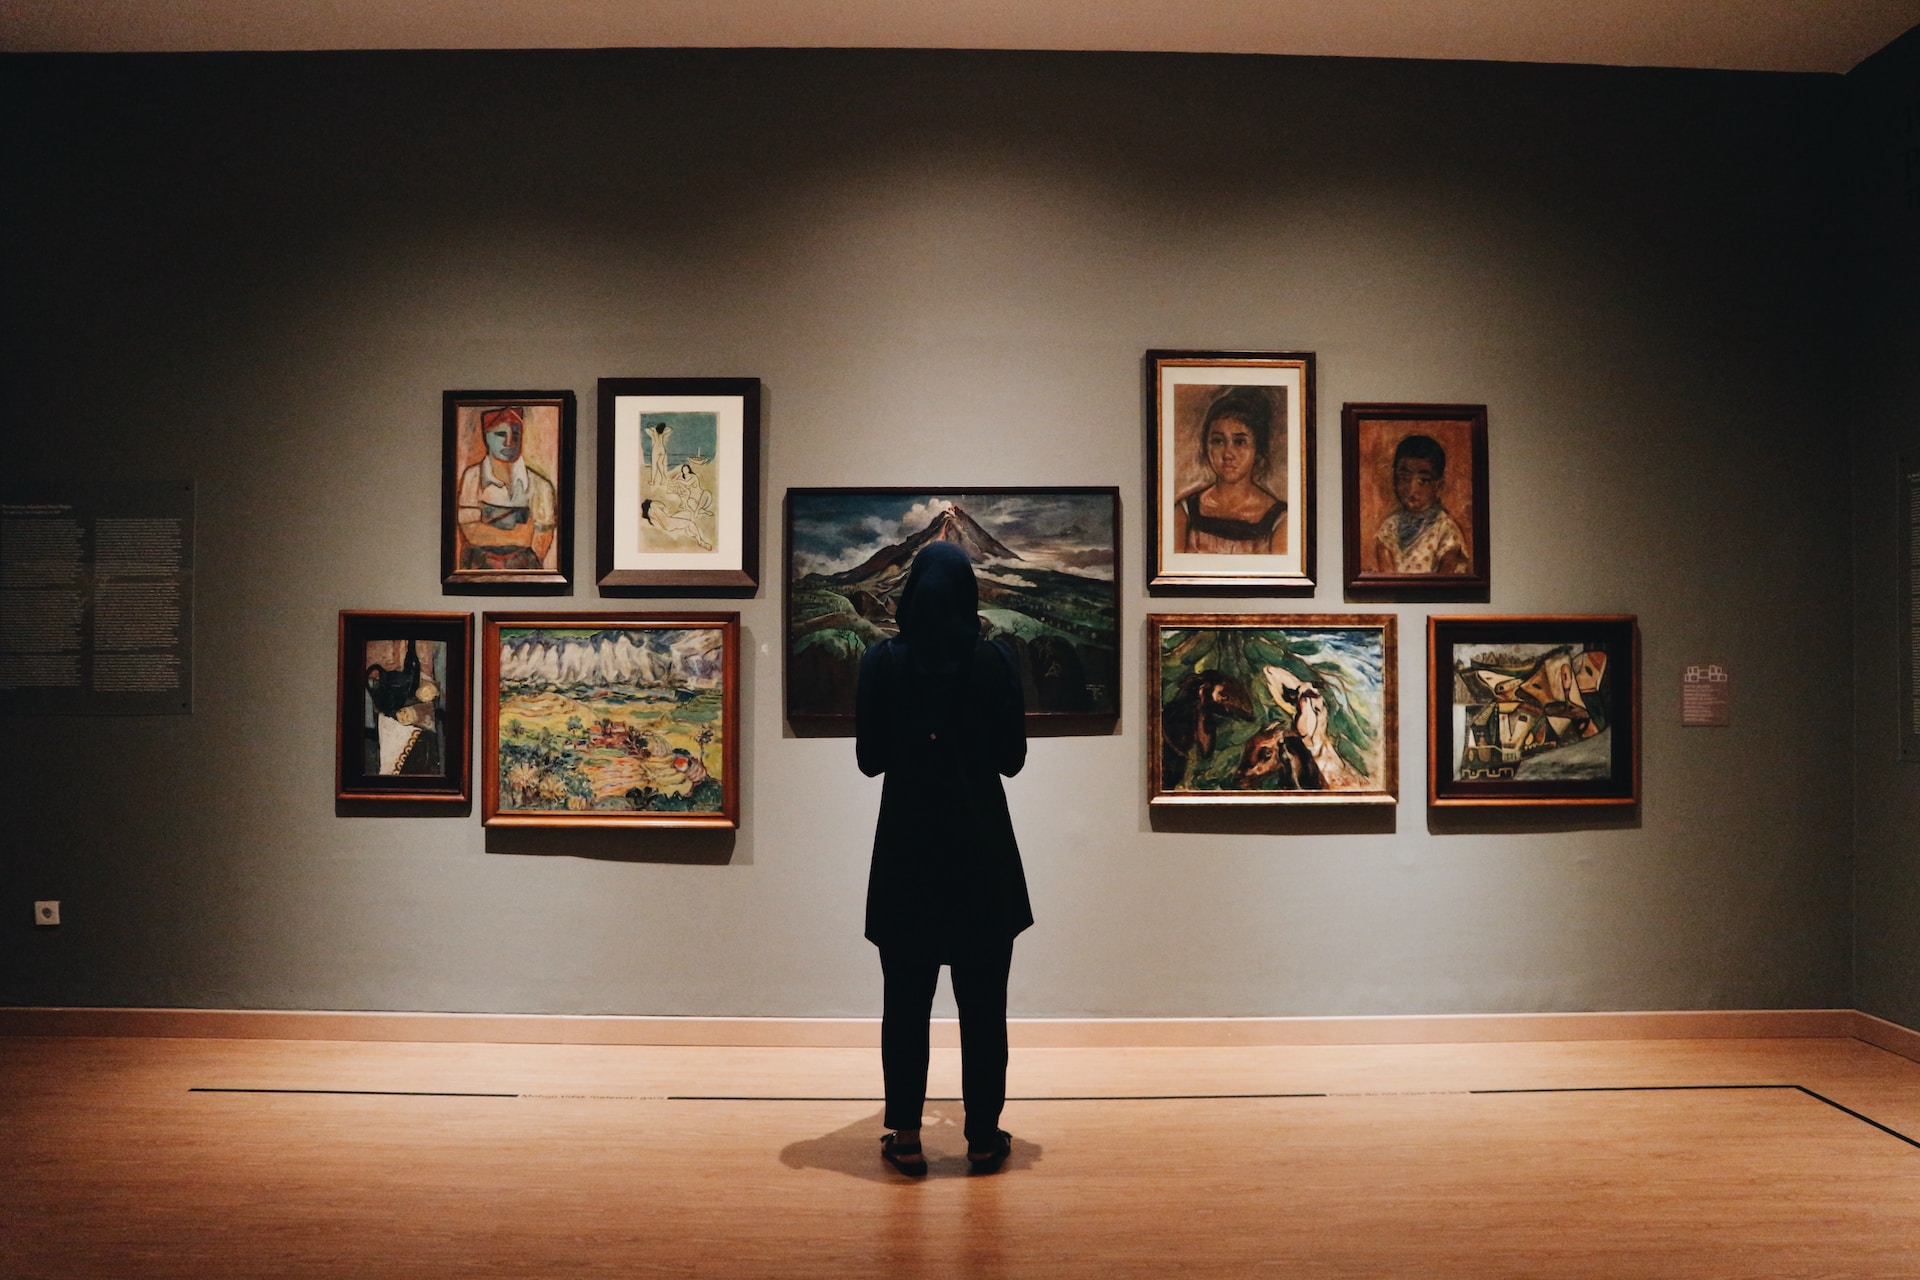 Description: A woman, in a black coat, has her back to the camera.  She is facing a wall of paintings in an art gallery.  Photo by Zalfa Imani on Unsplash.